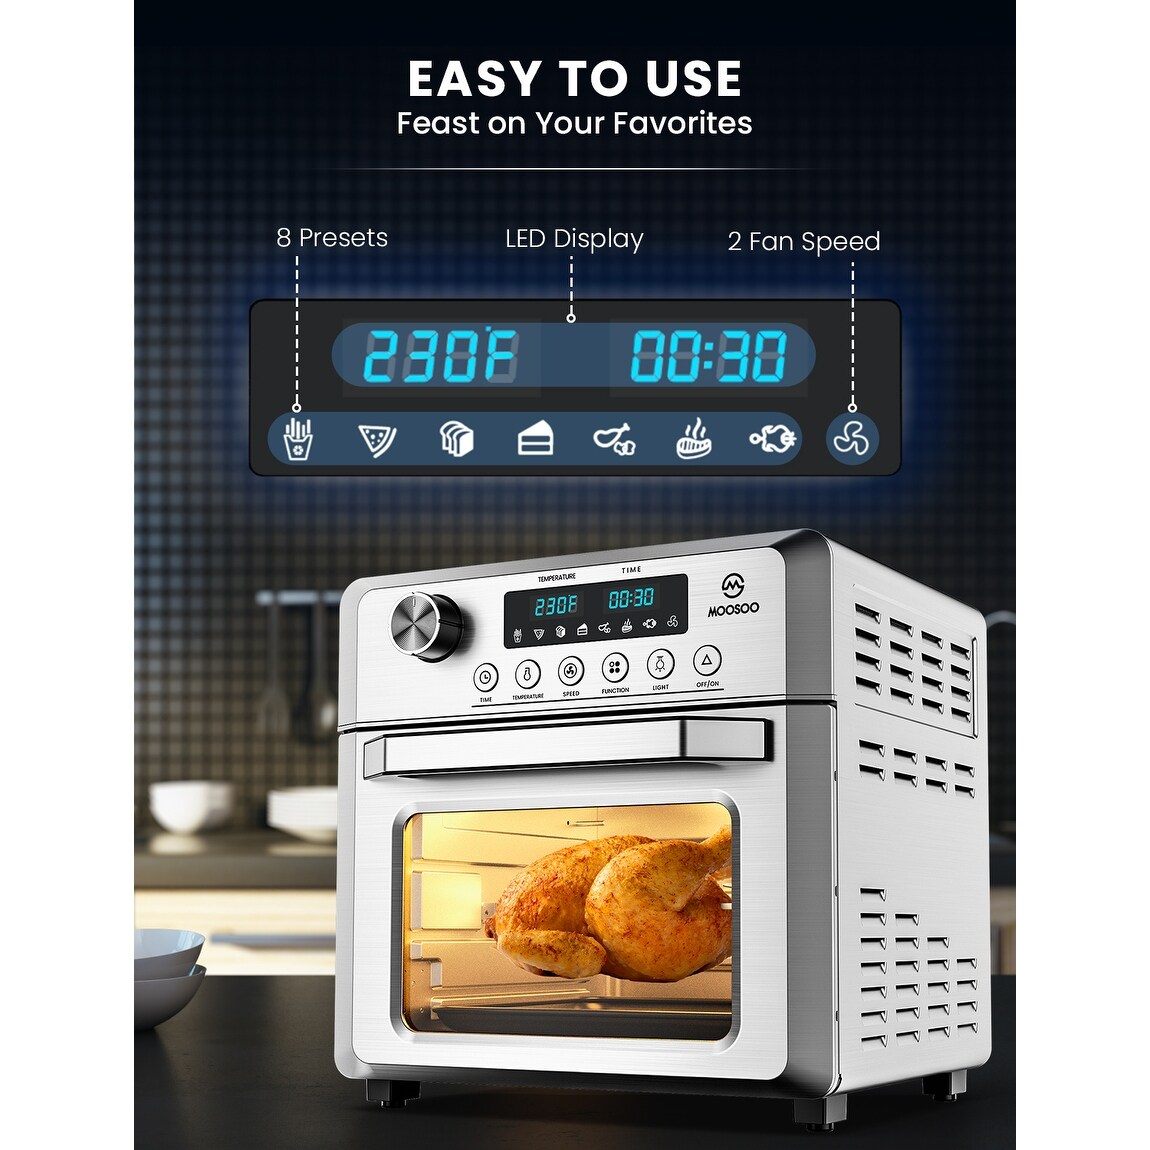 Moosoo Air Fryer Oven with Digital Touchscreen, 8 Preset Modes